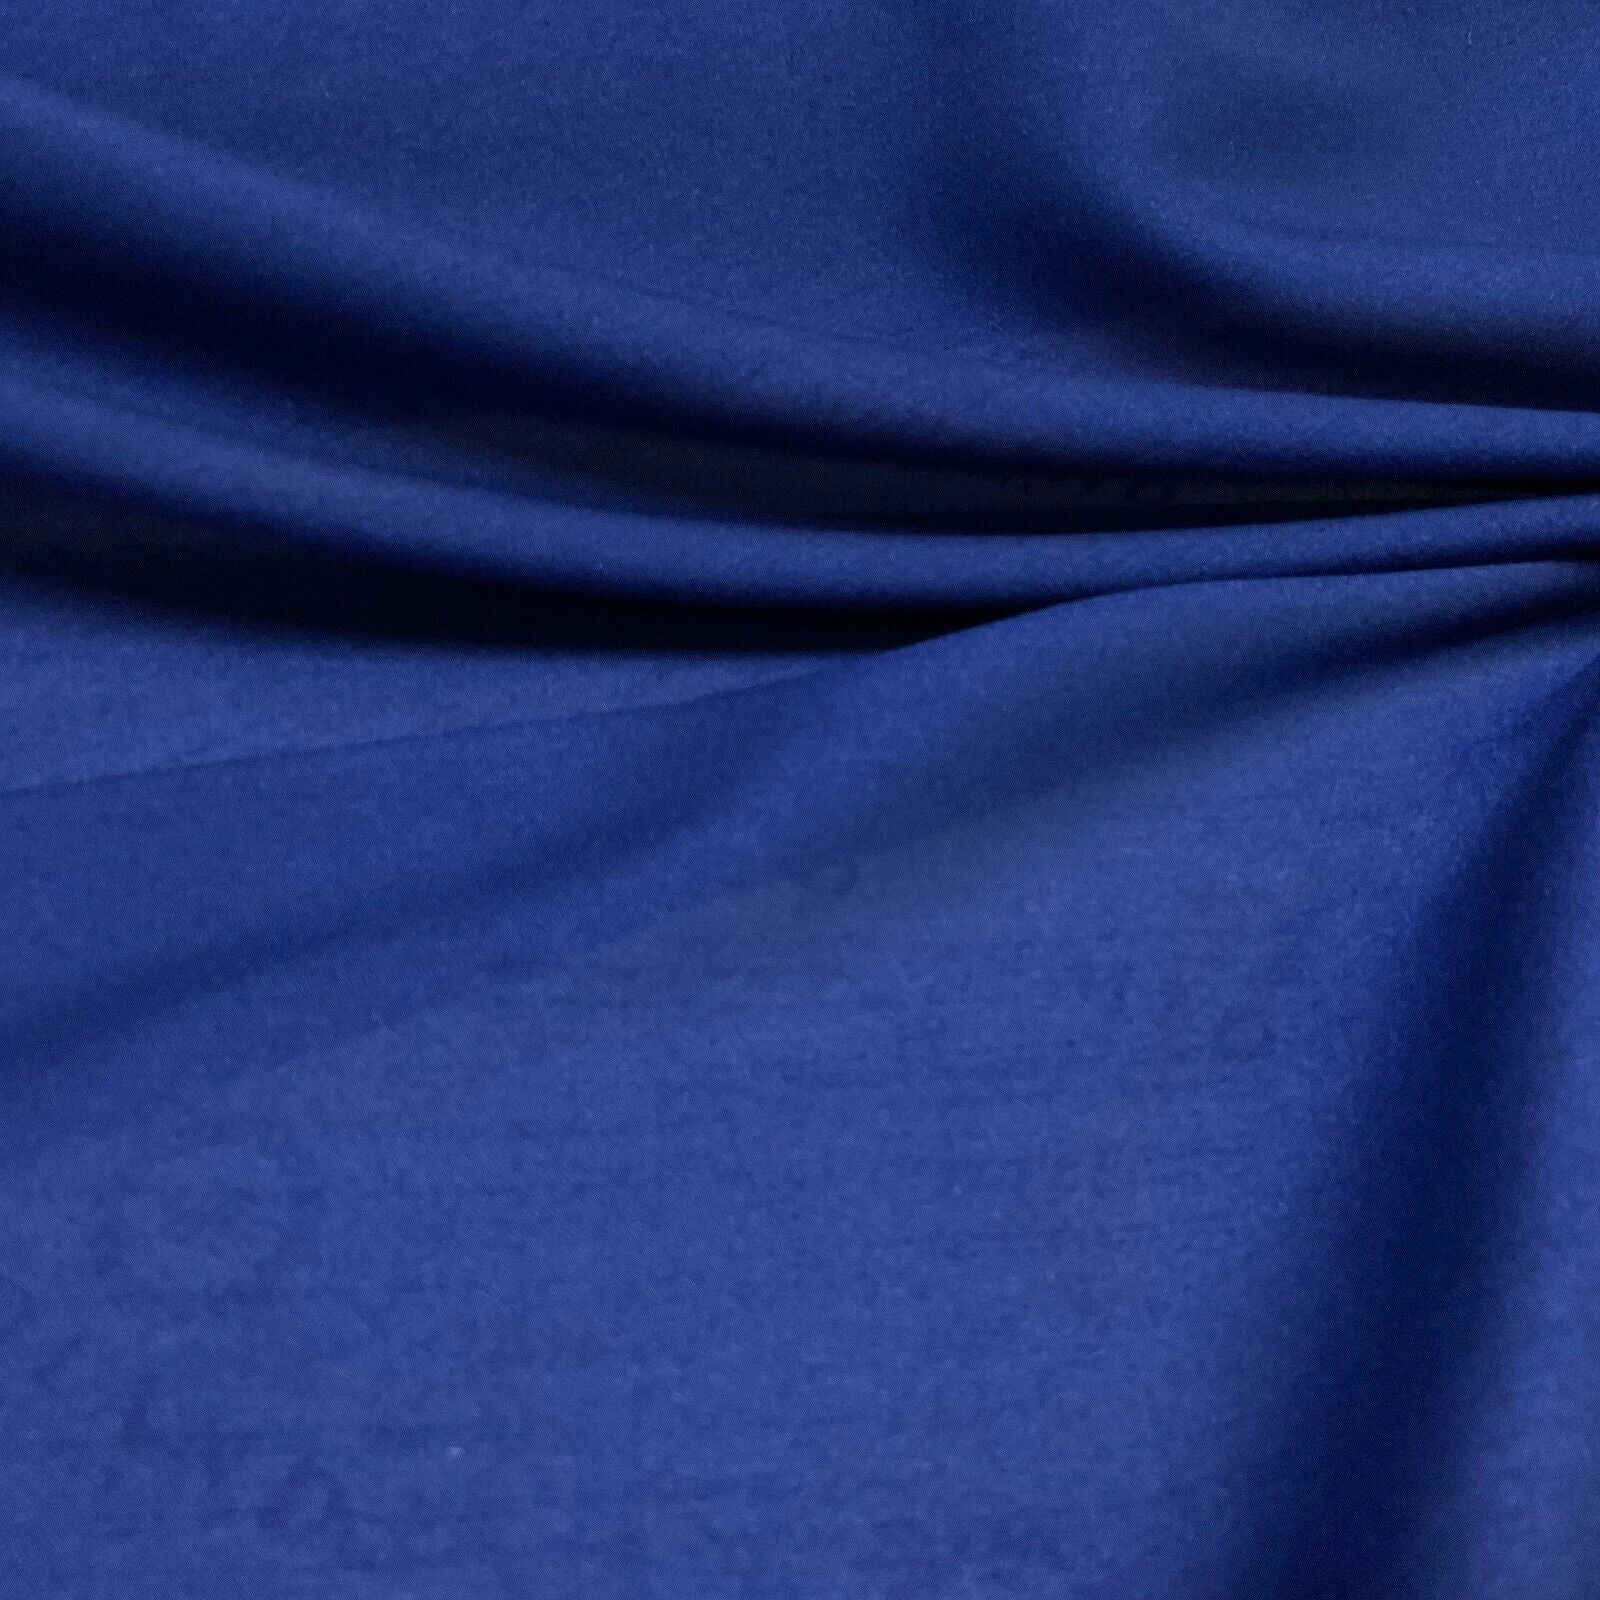 Plain Silky crepe Faux silk dress fabric 44 inches wide M1693